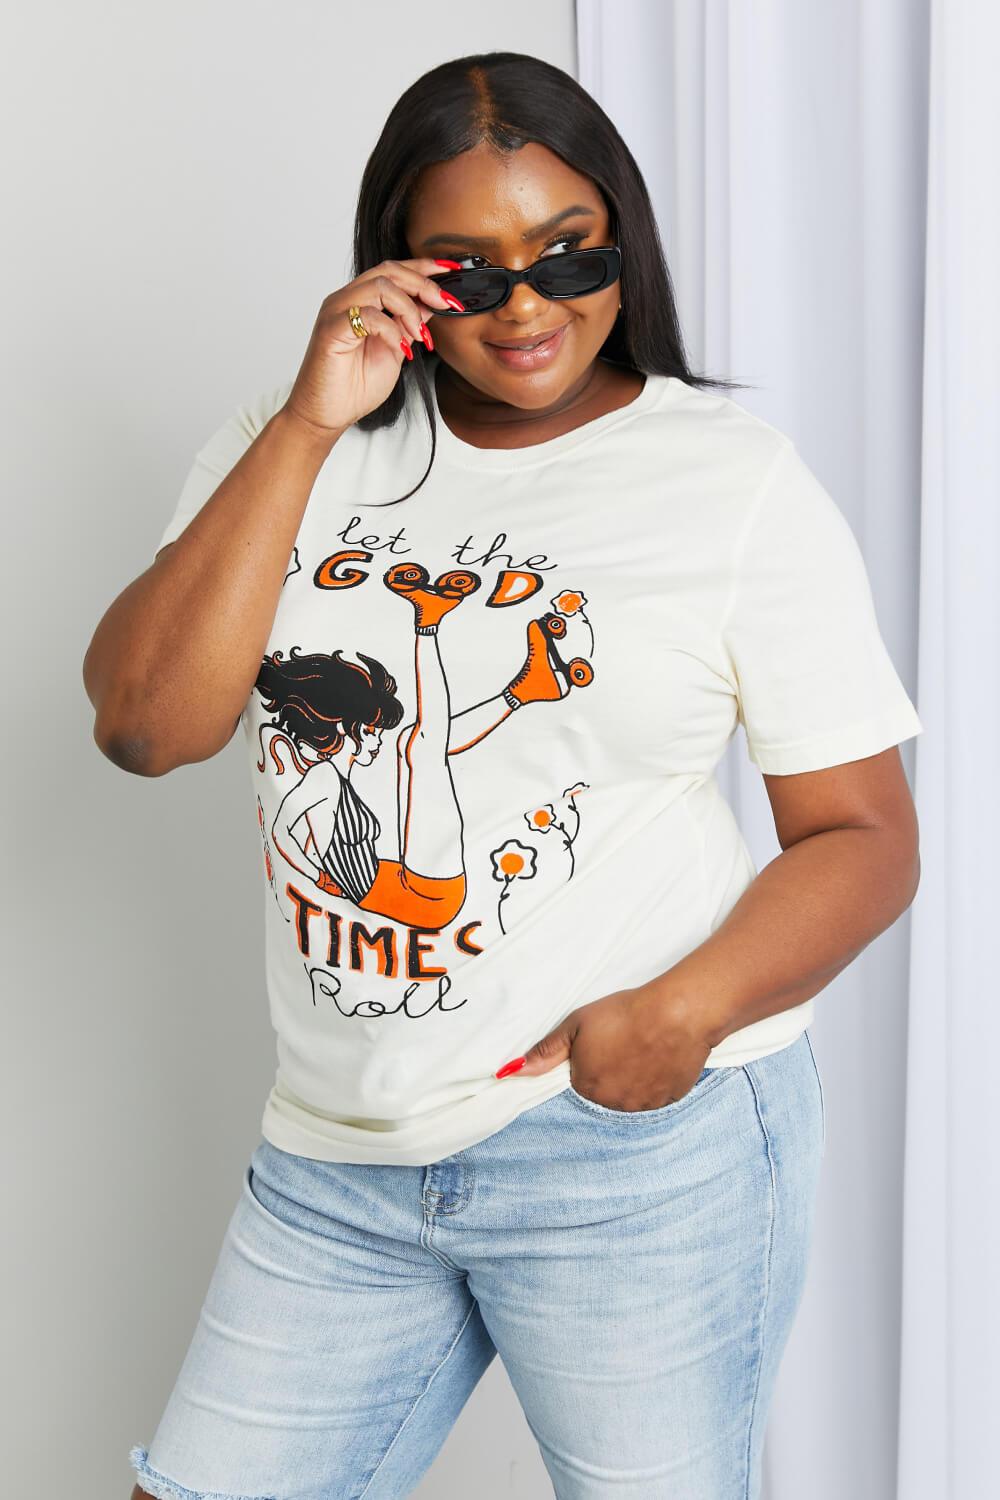 mineB Full Size LET THE GOOD TIMES ROLL Graphic Tee - Glamorous Boutique USA L.L.C.